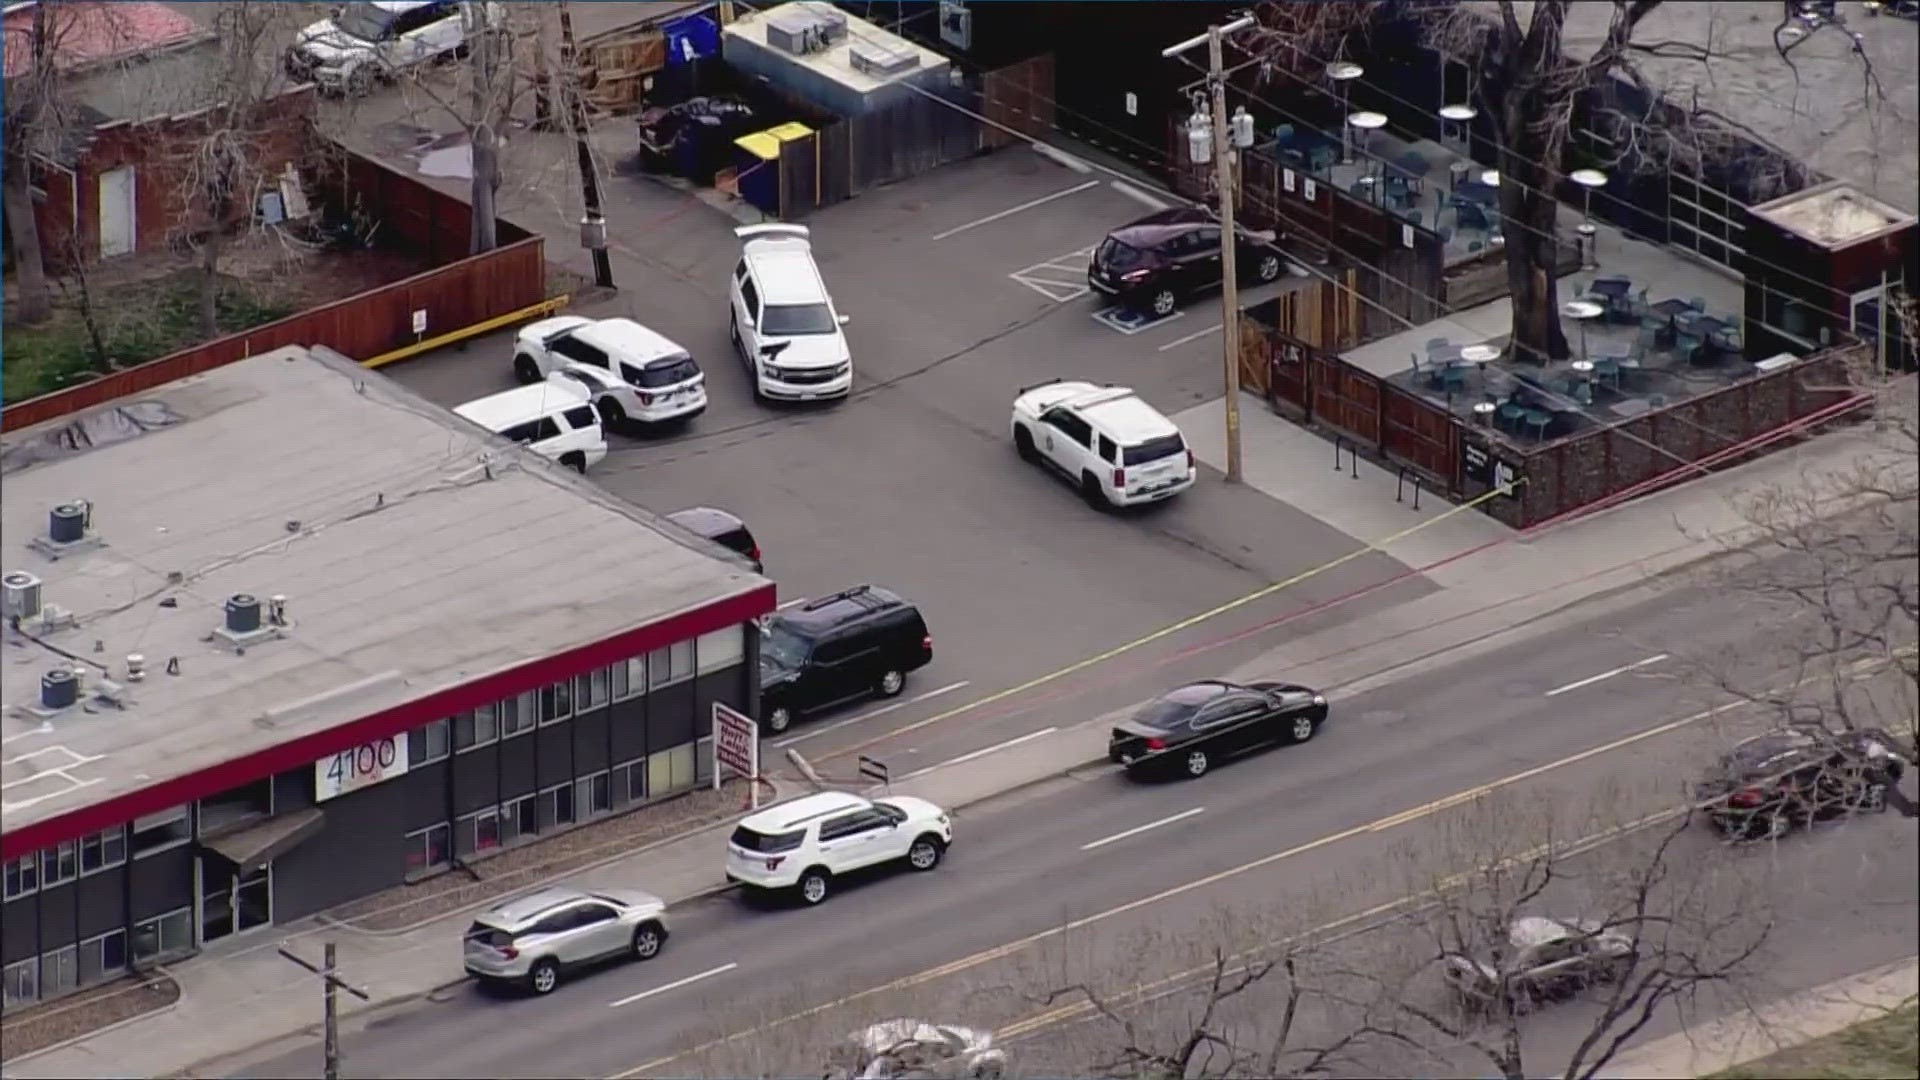 Monday afternoon, police were seen investigating in the area of American Elm restaurant at 4132 West 38th Ave.